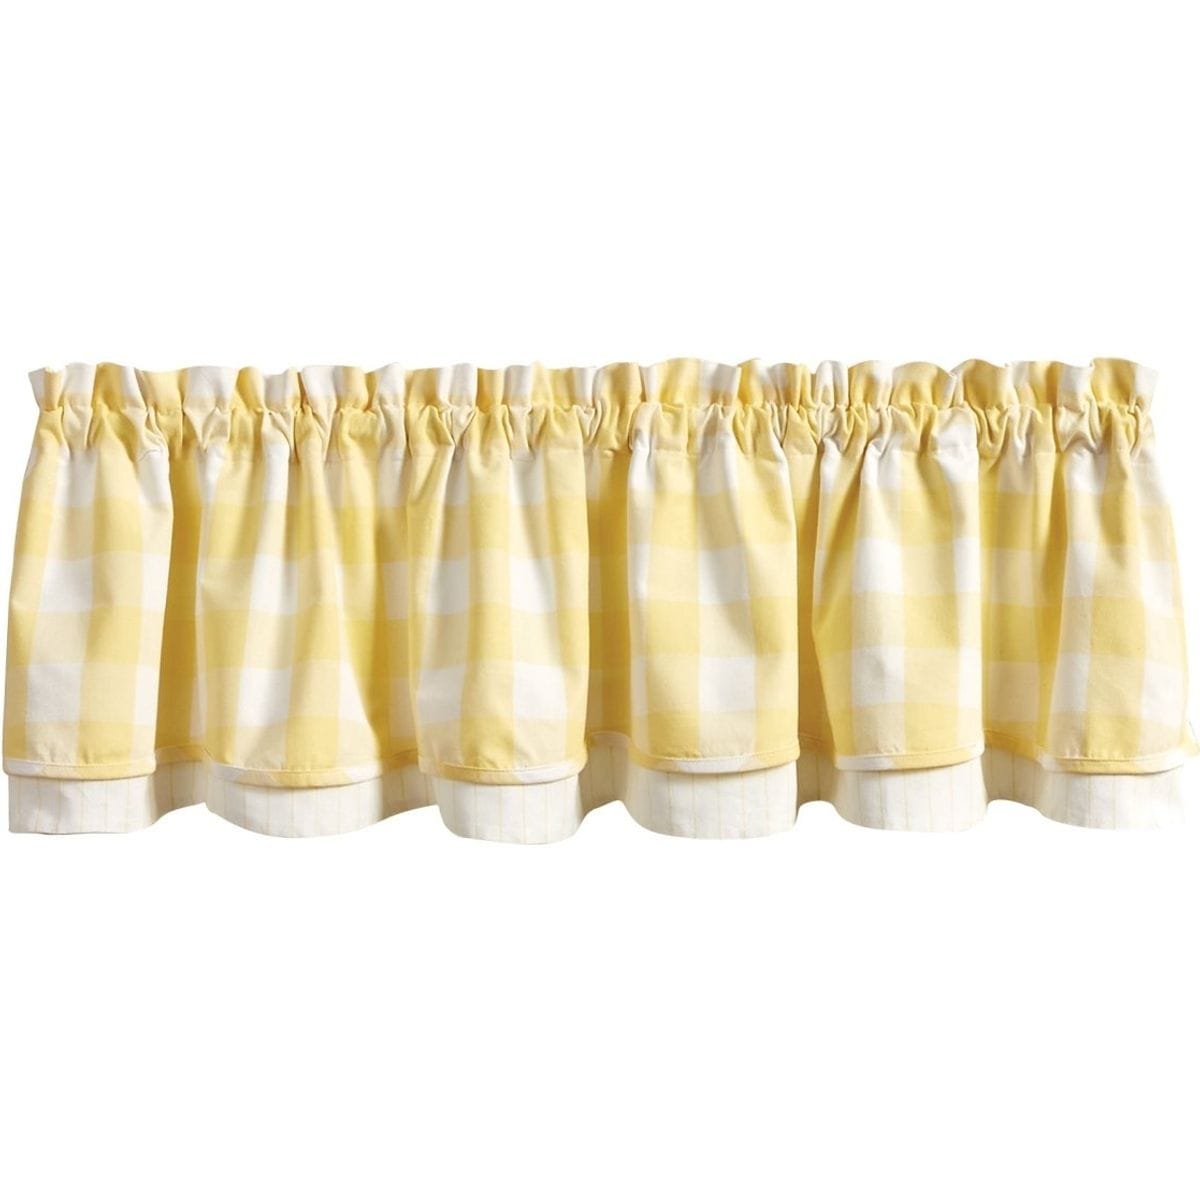 Wicklow Check in Yellow Layered Valance Lined-Park Designs-The Village Merchant